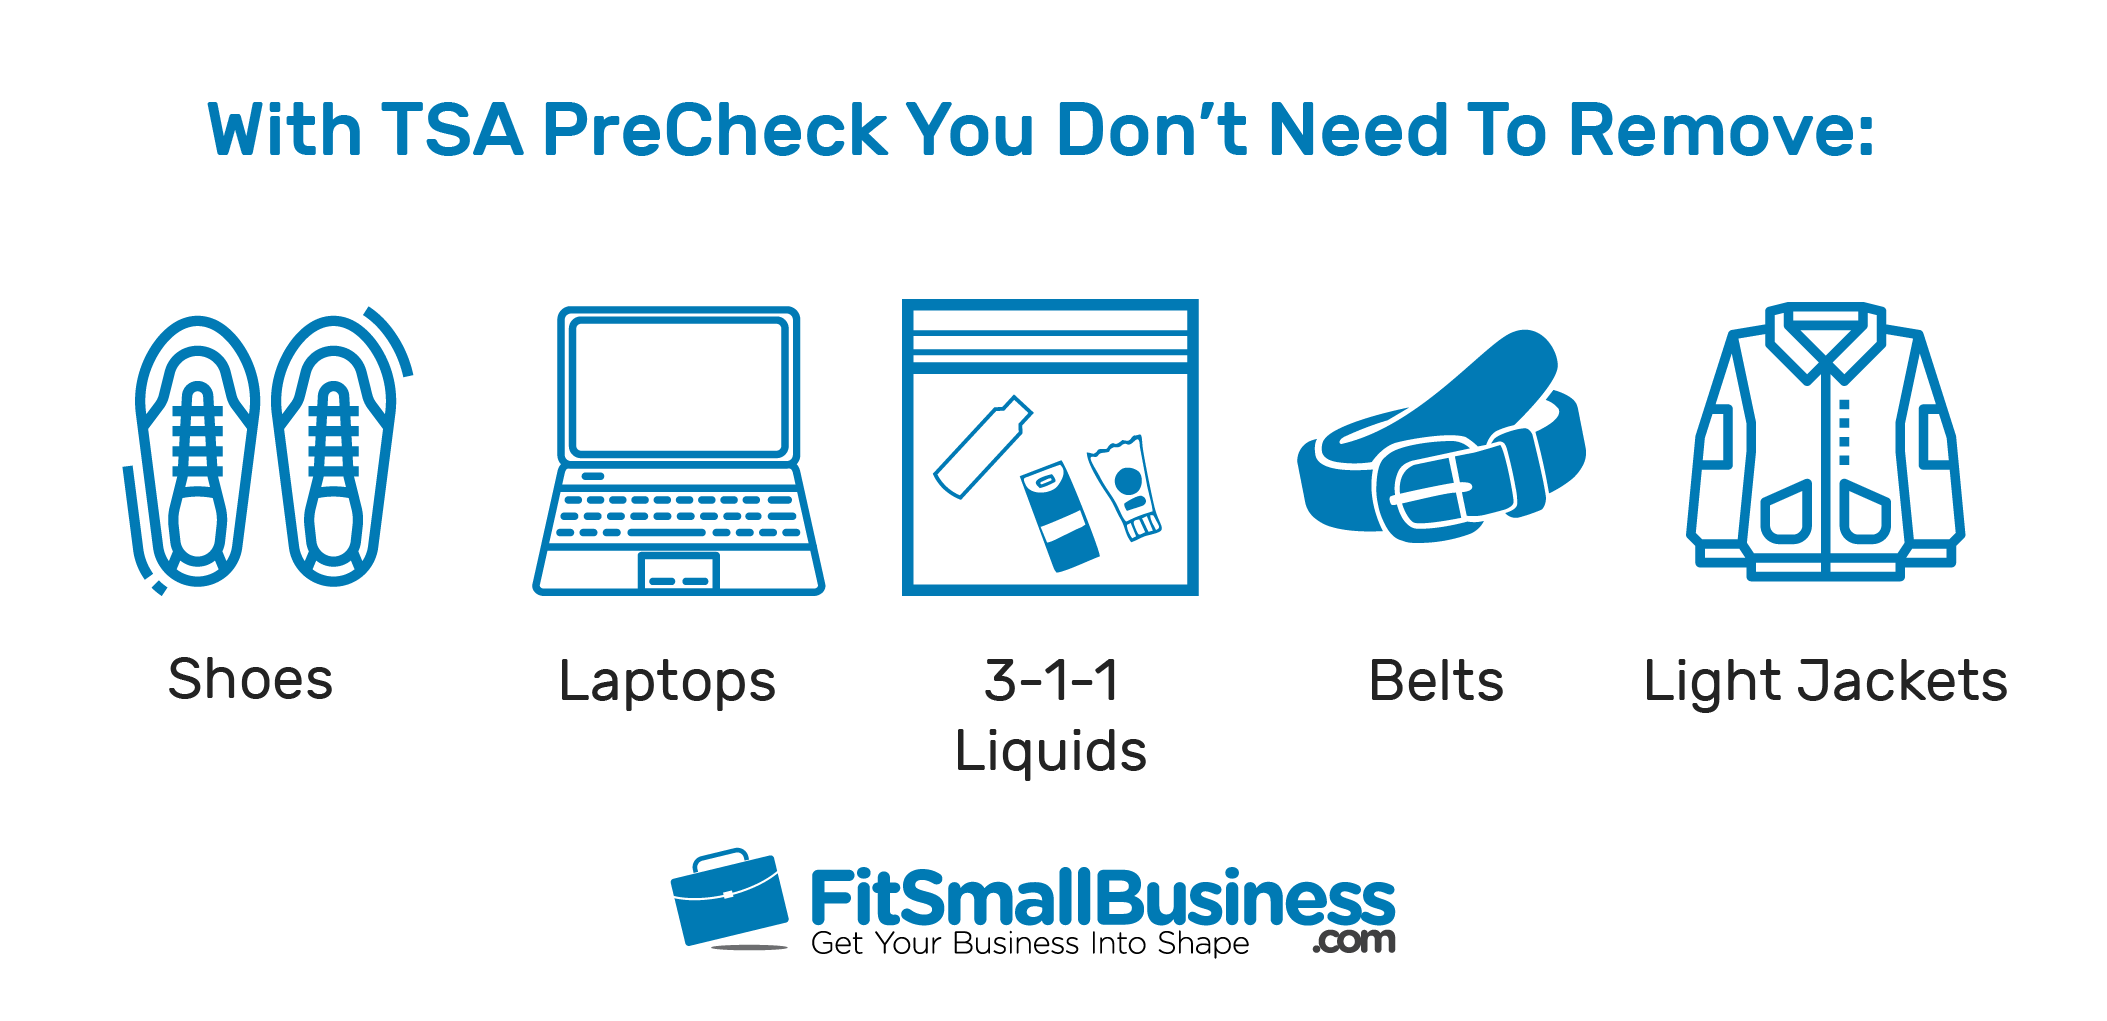 Info-graphics of items that you don't need to remove for tsa precheck